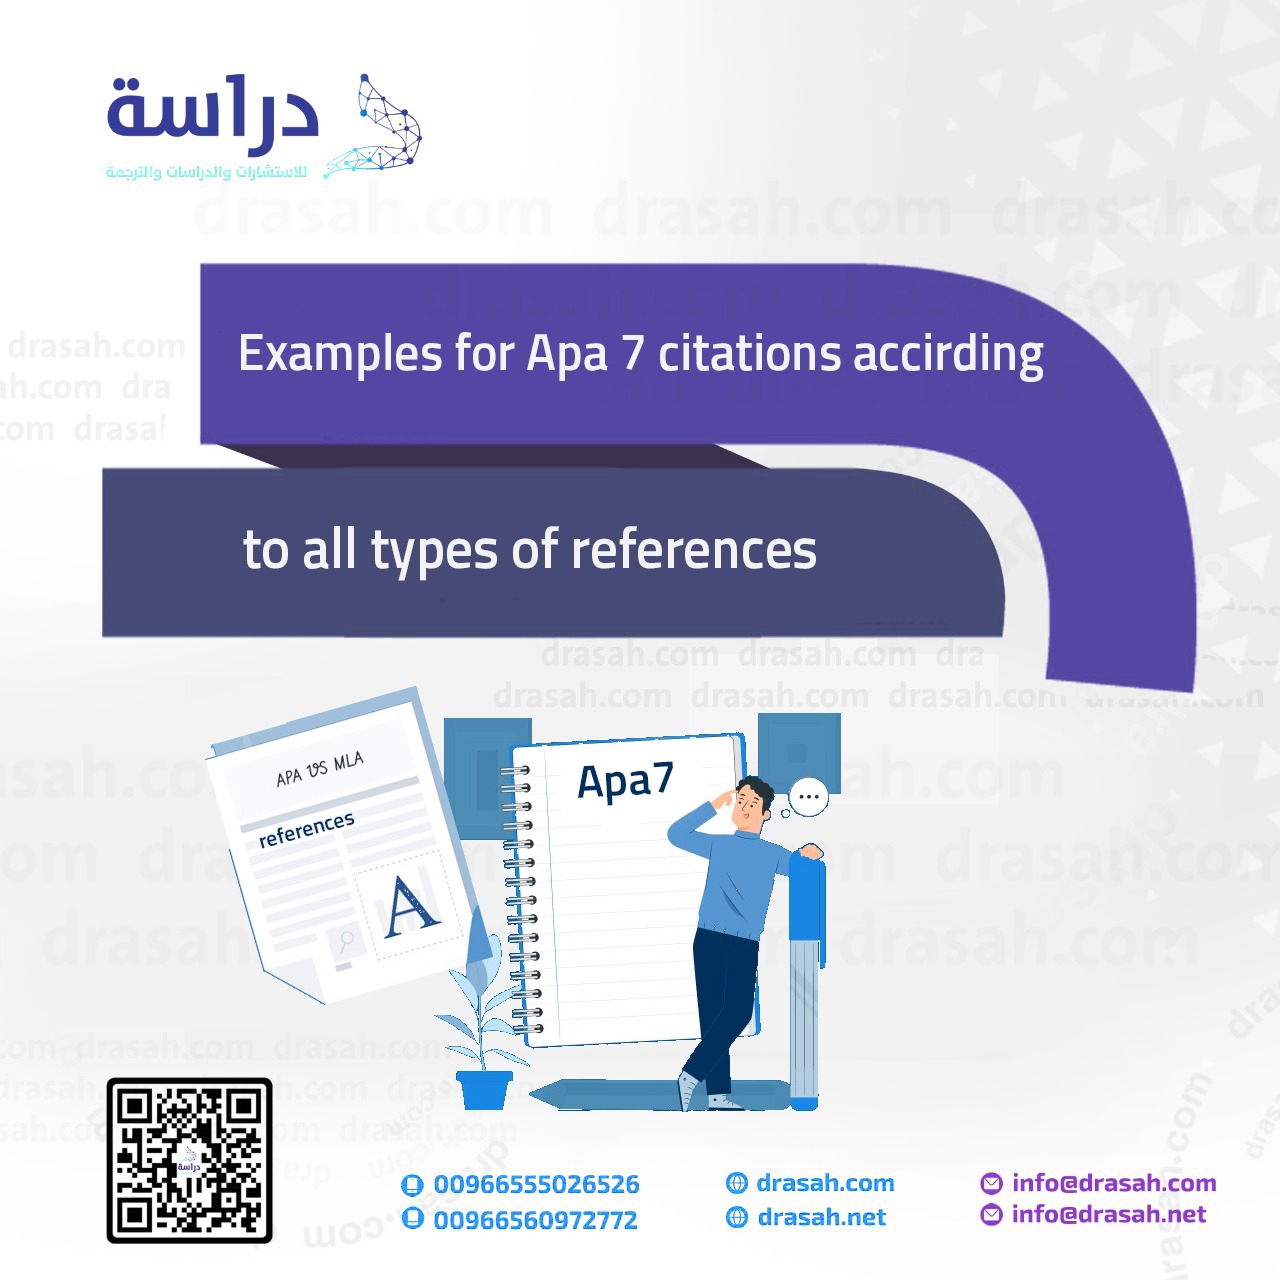 Examples for Apa 7 citations according to all types of references